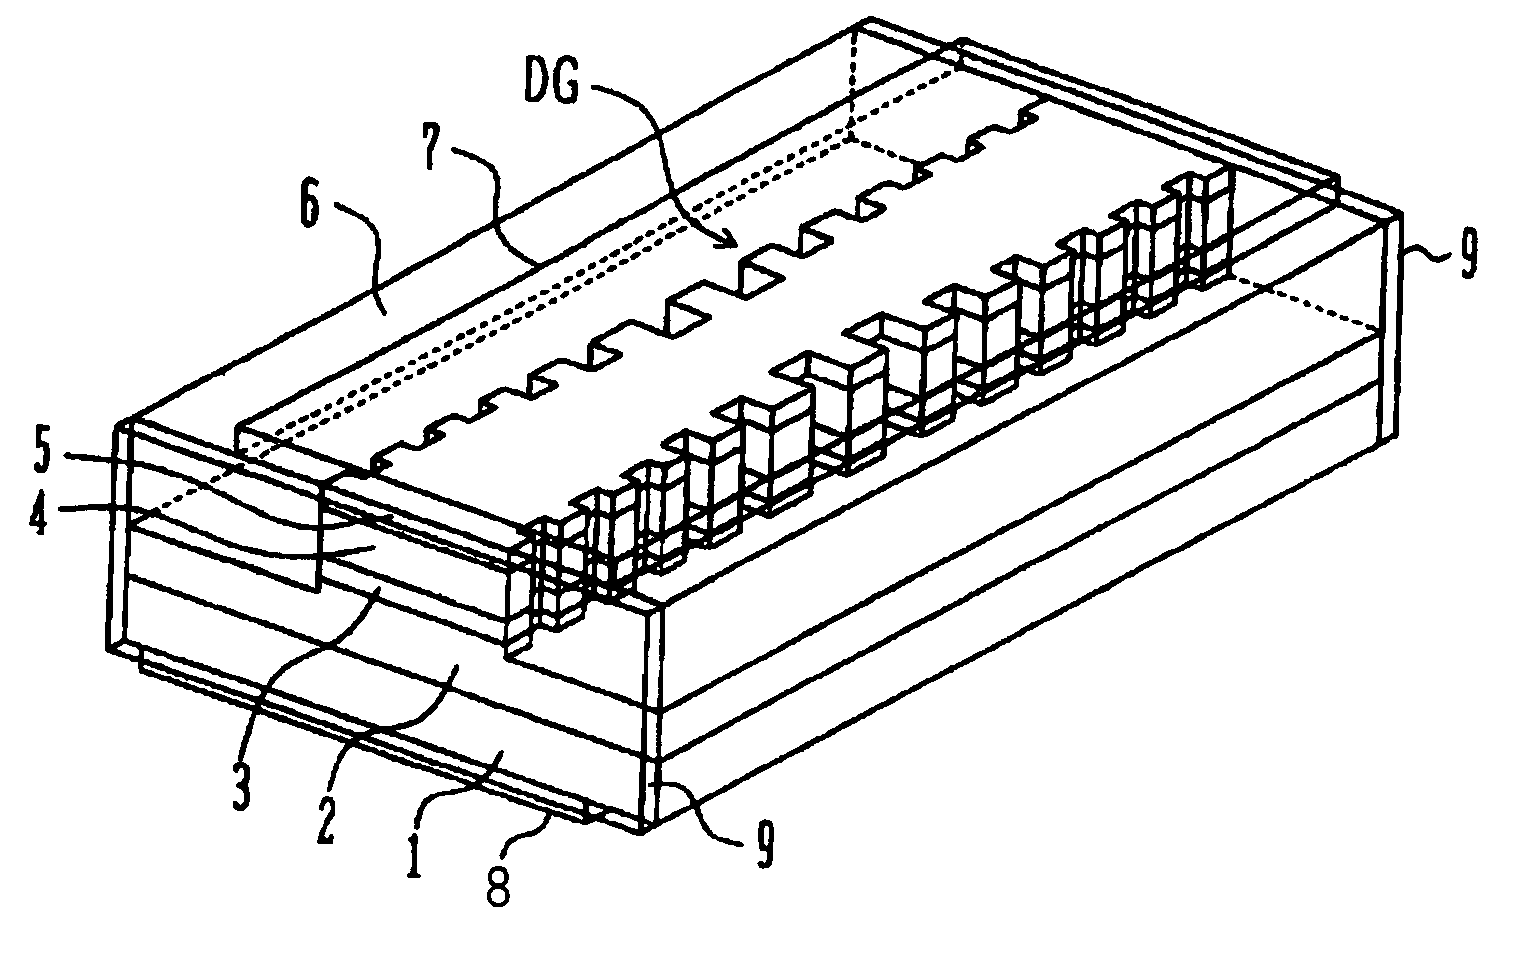 Optical semiconductor device having diffraction grating